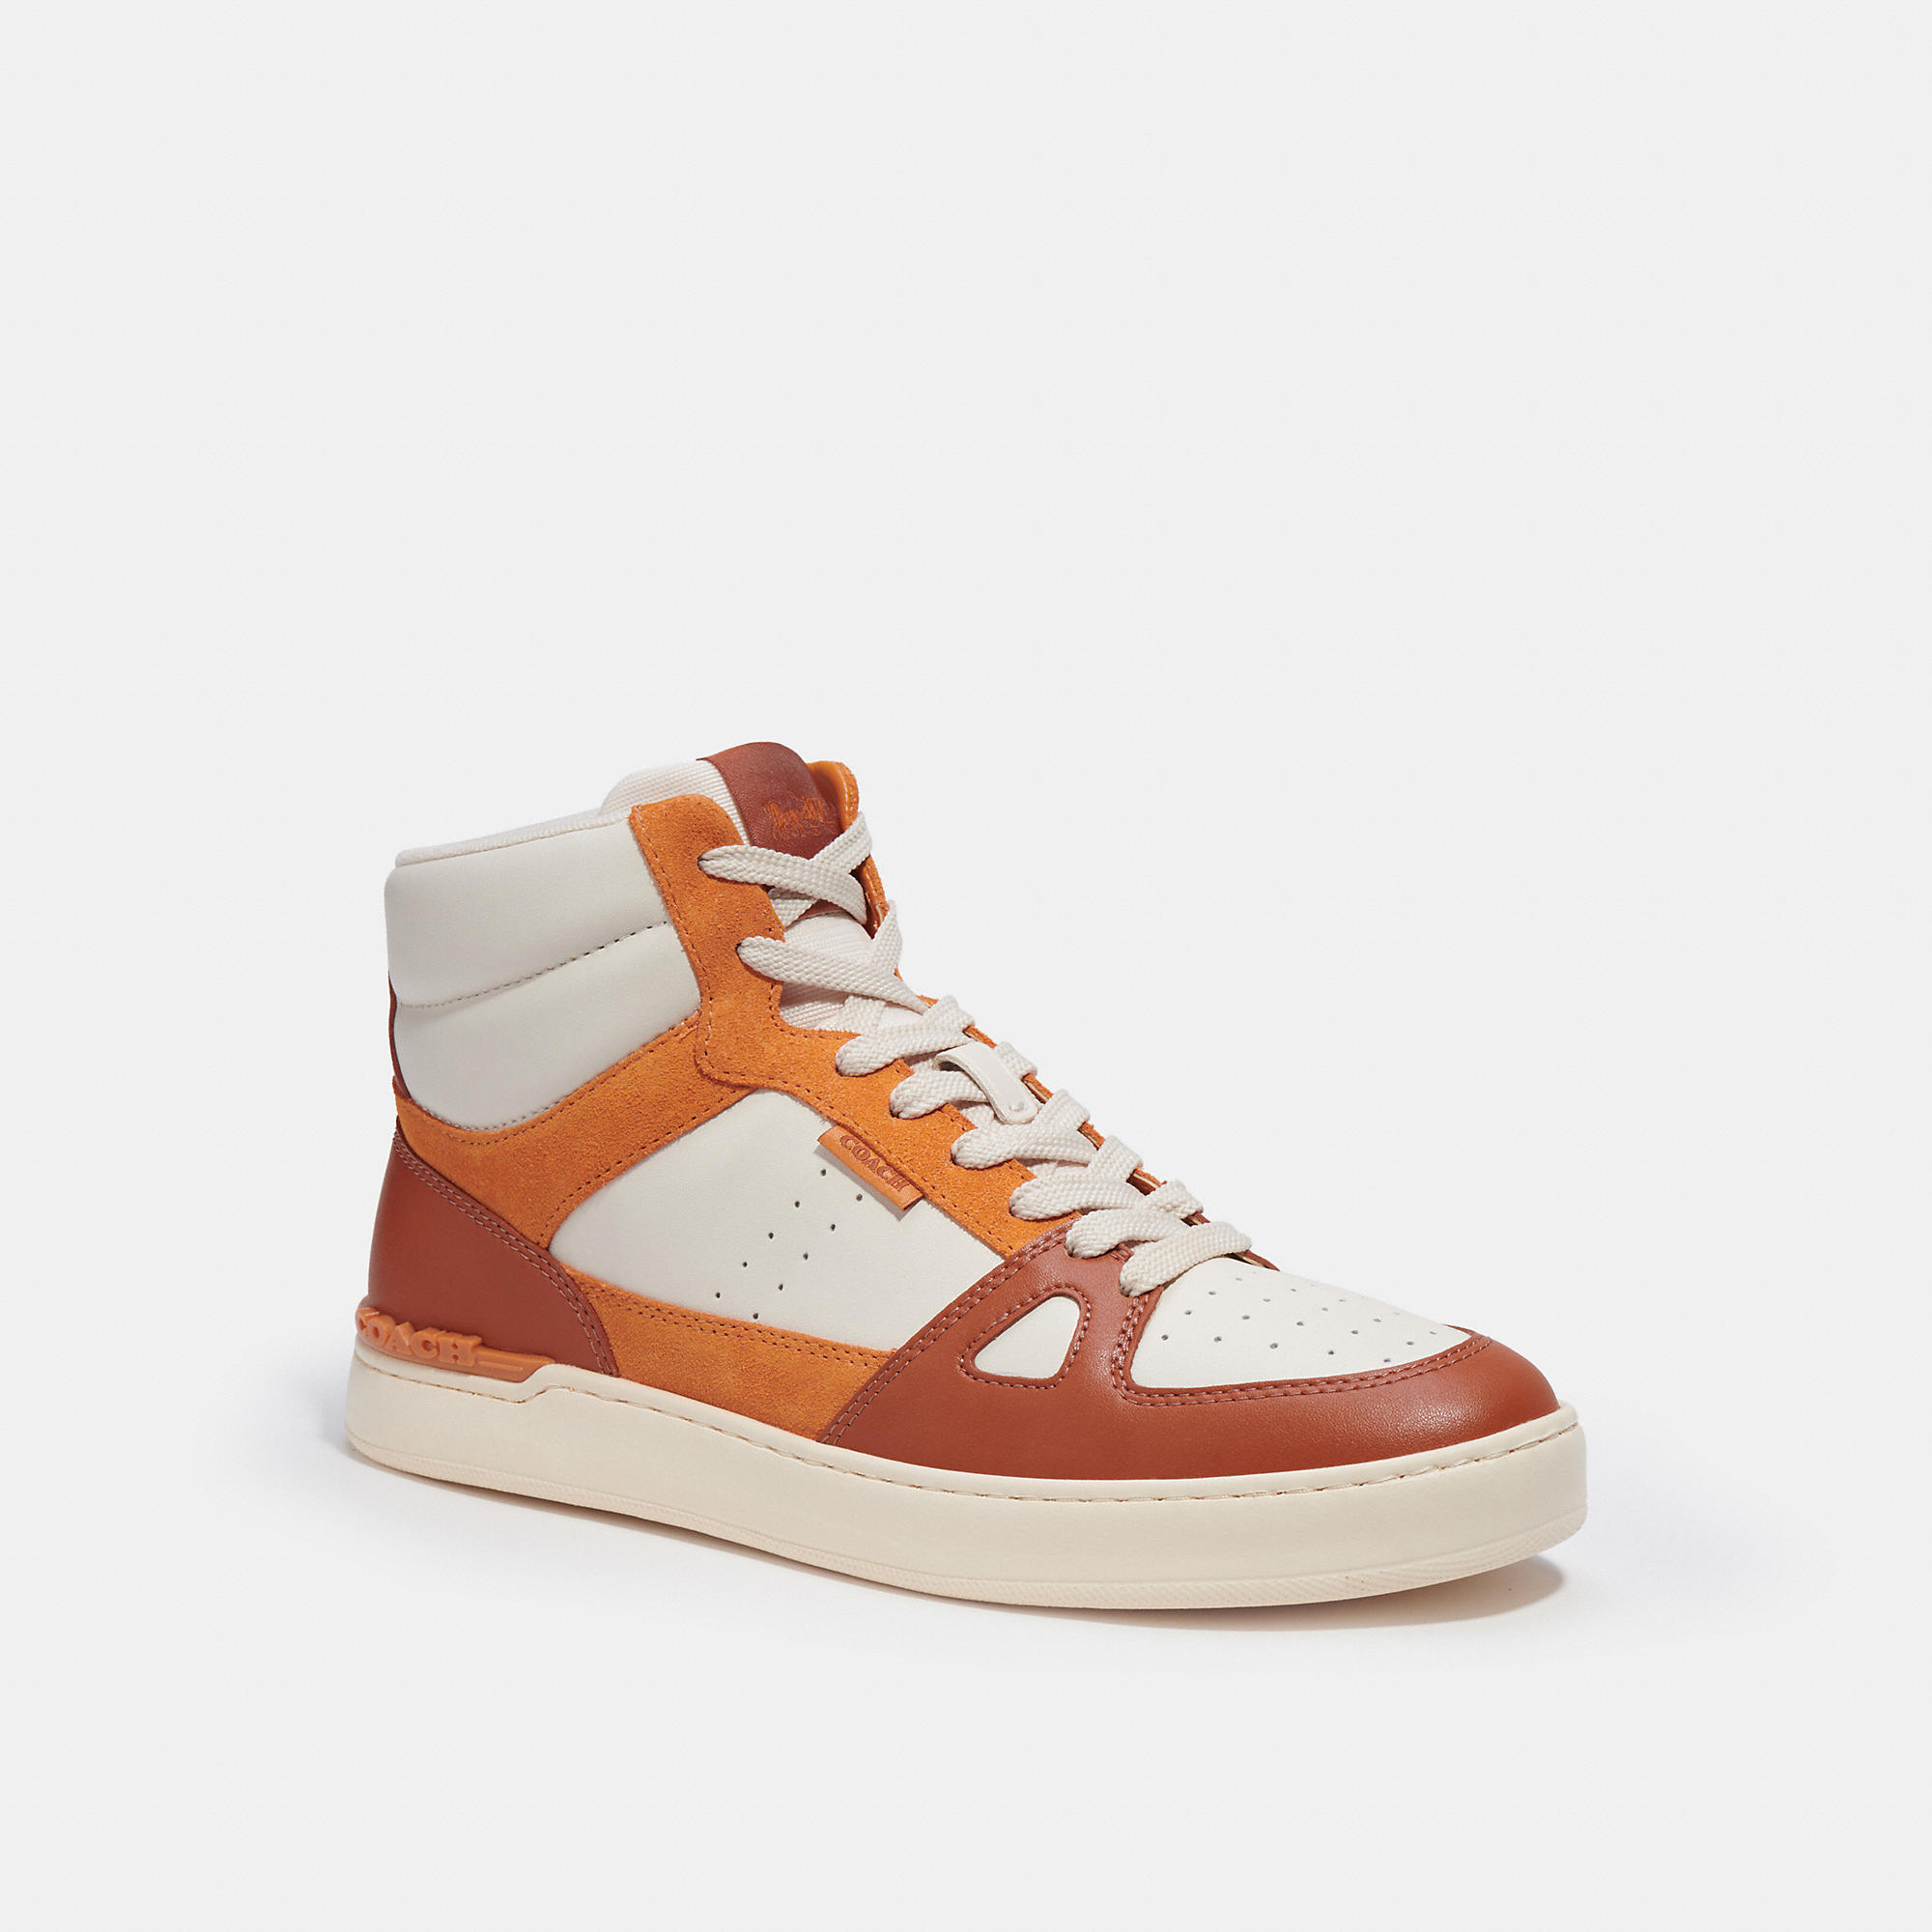 Coach Outlet Clip Court High Top Sneaker In Orange